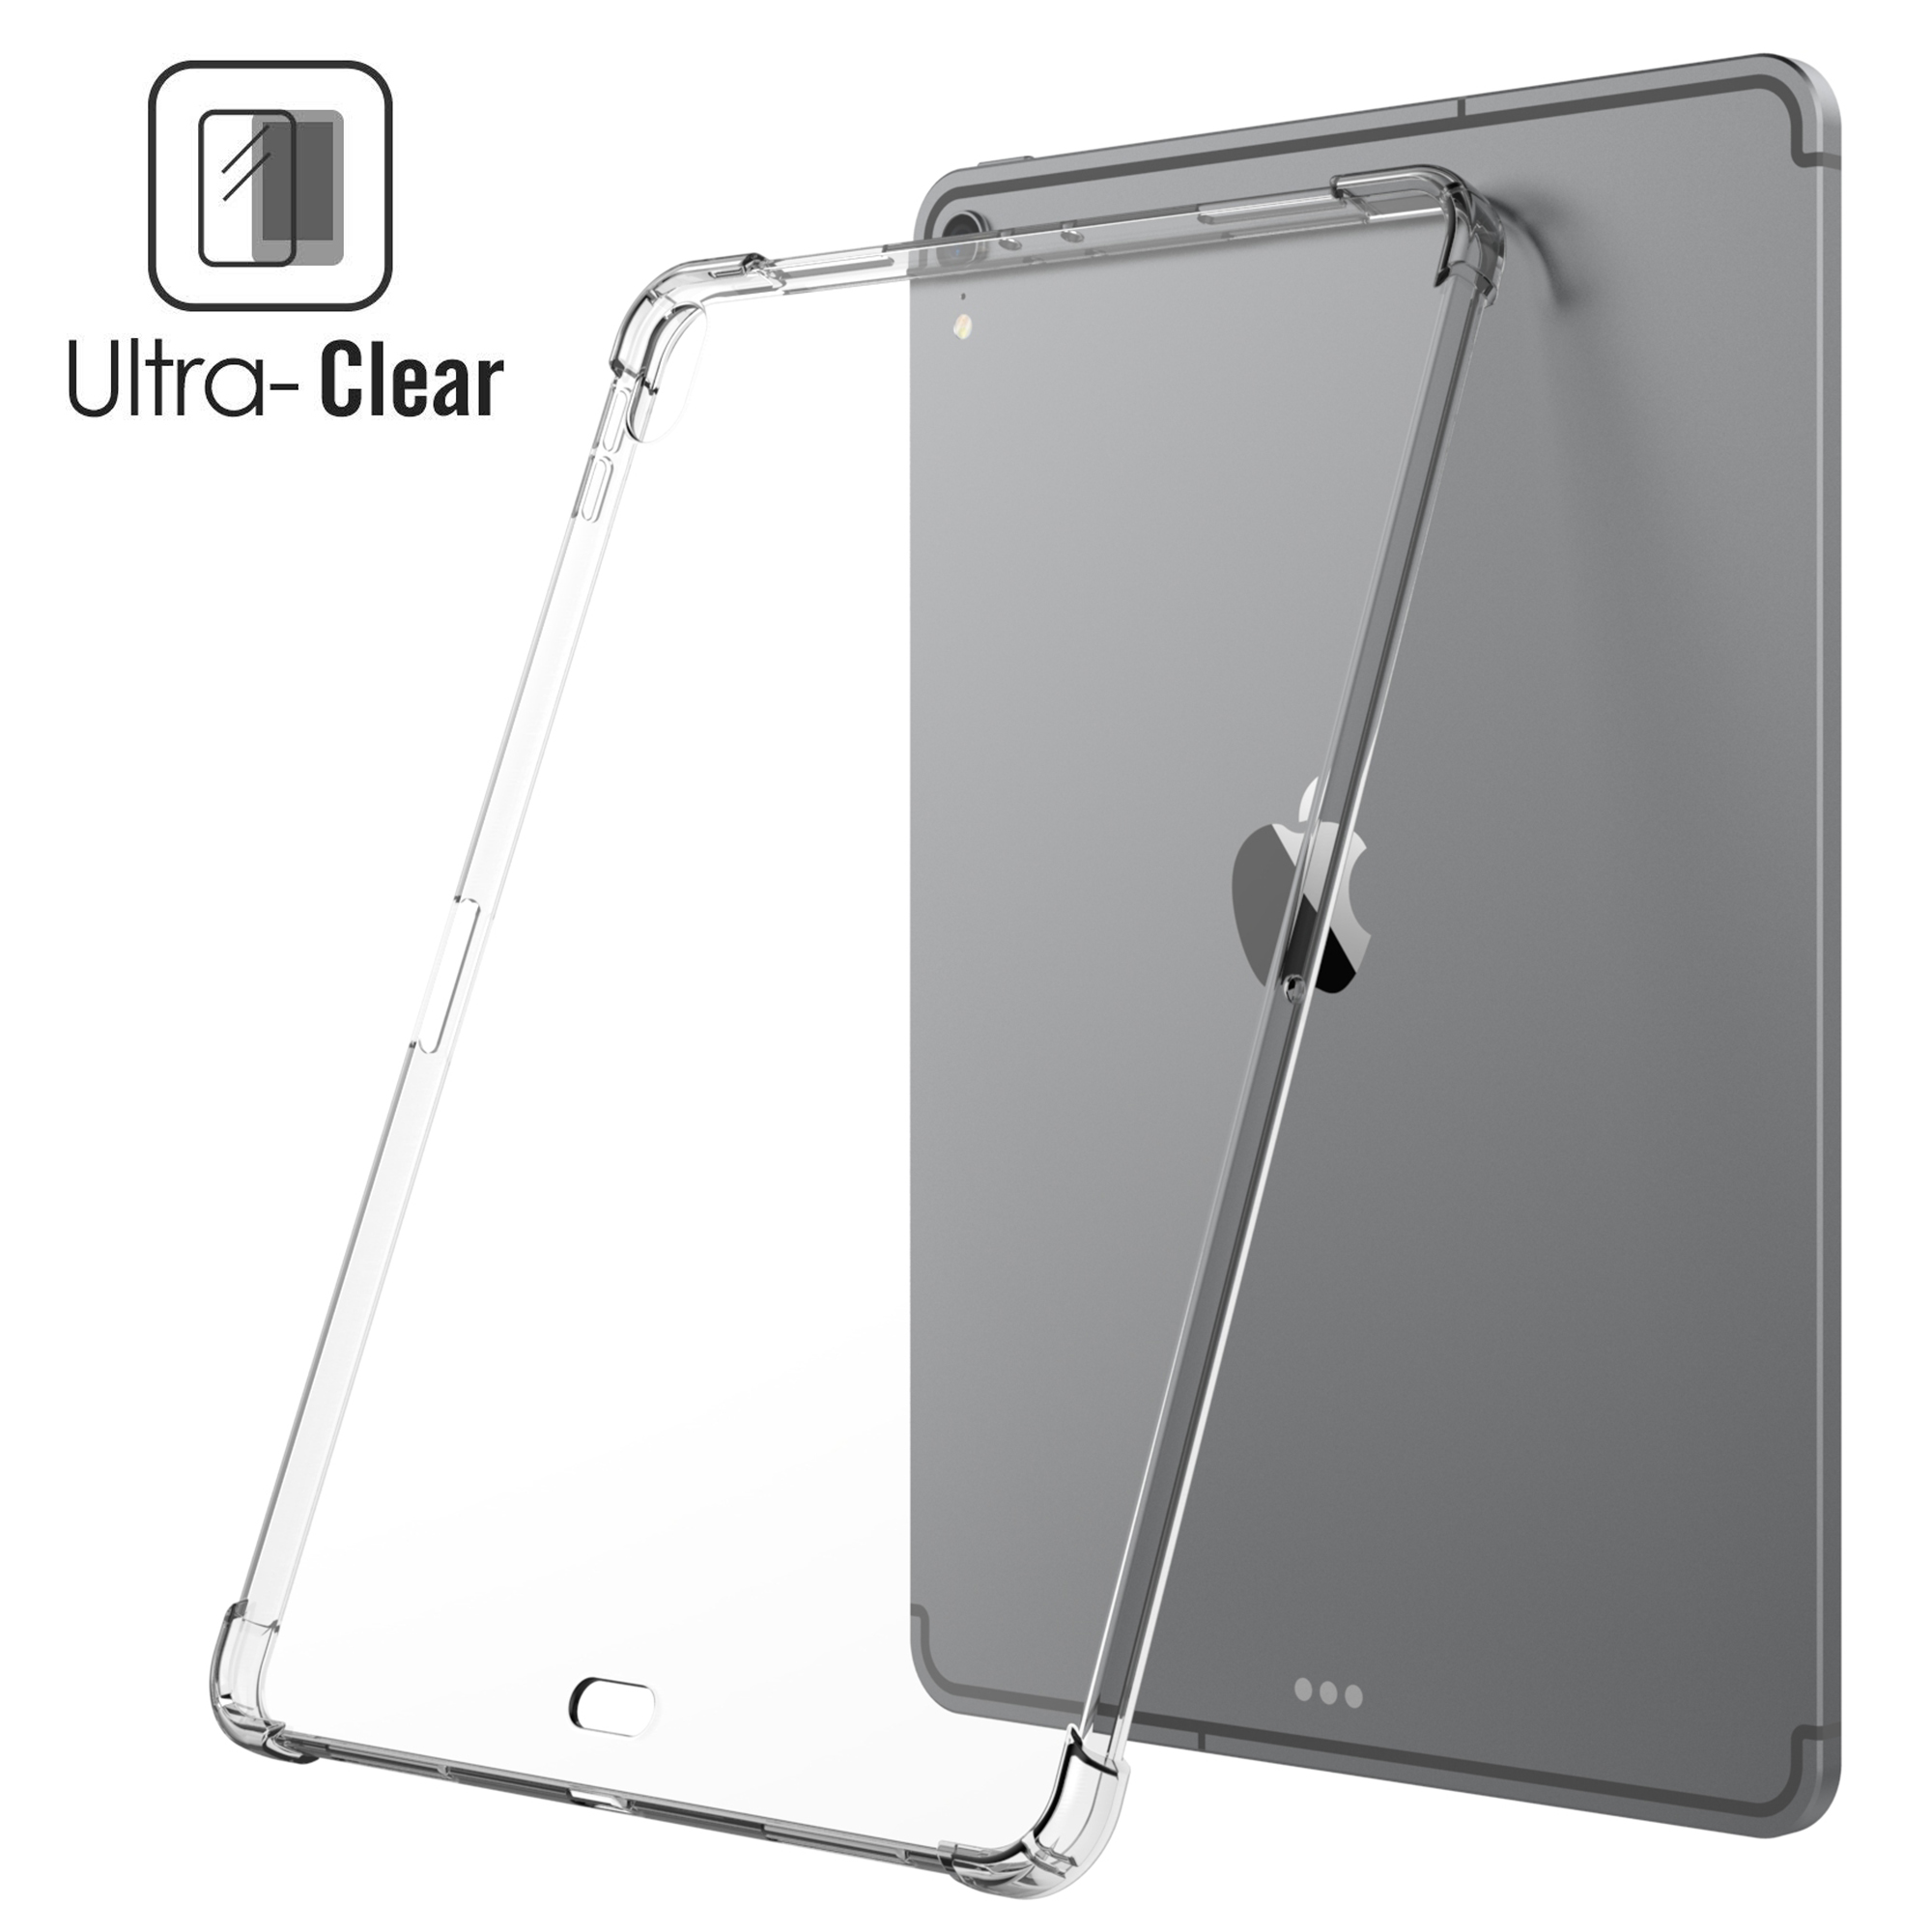 Luvvitt iPad Pro 11 Case CRYSTAL VIEW Flexible TPU Slim Back Cover 2018 - Clear